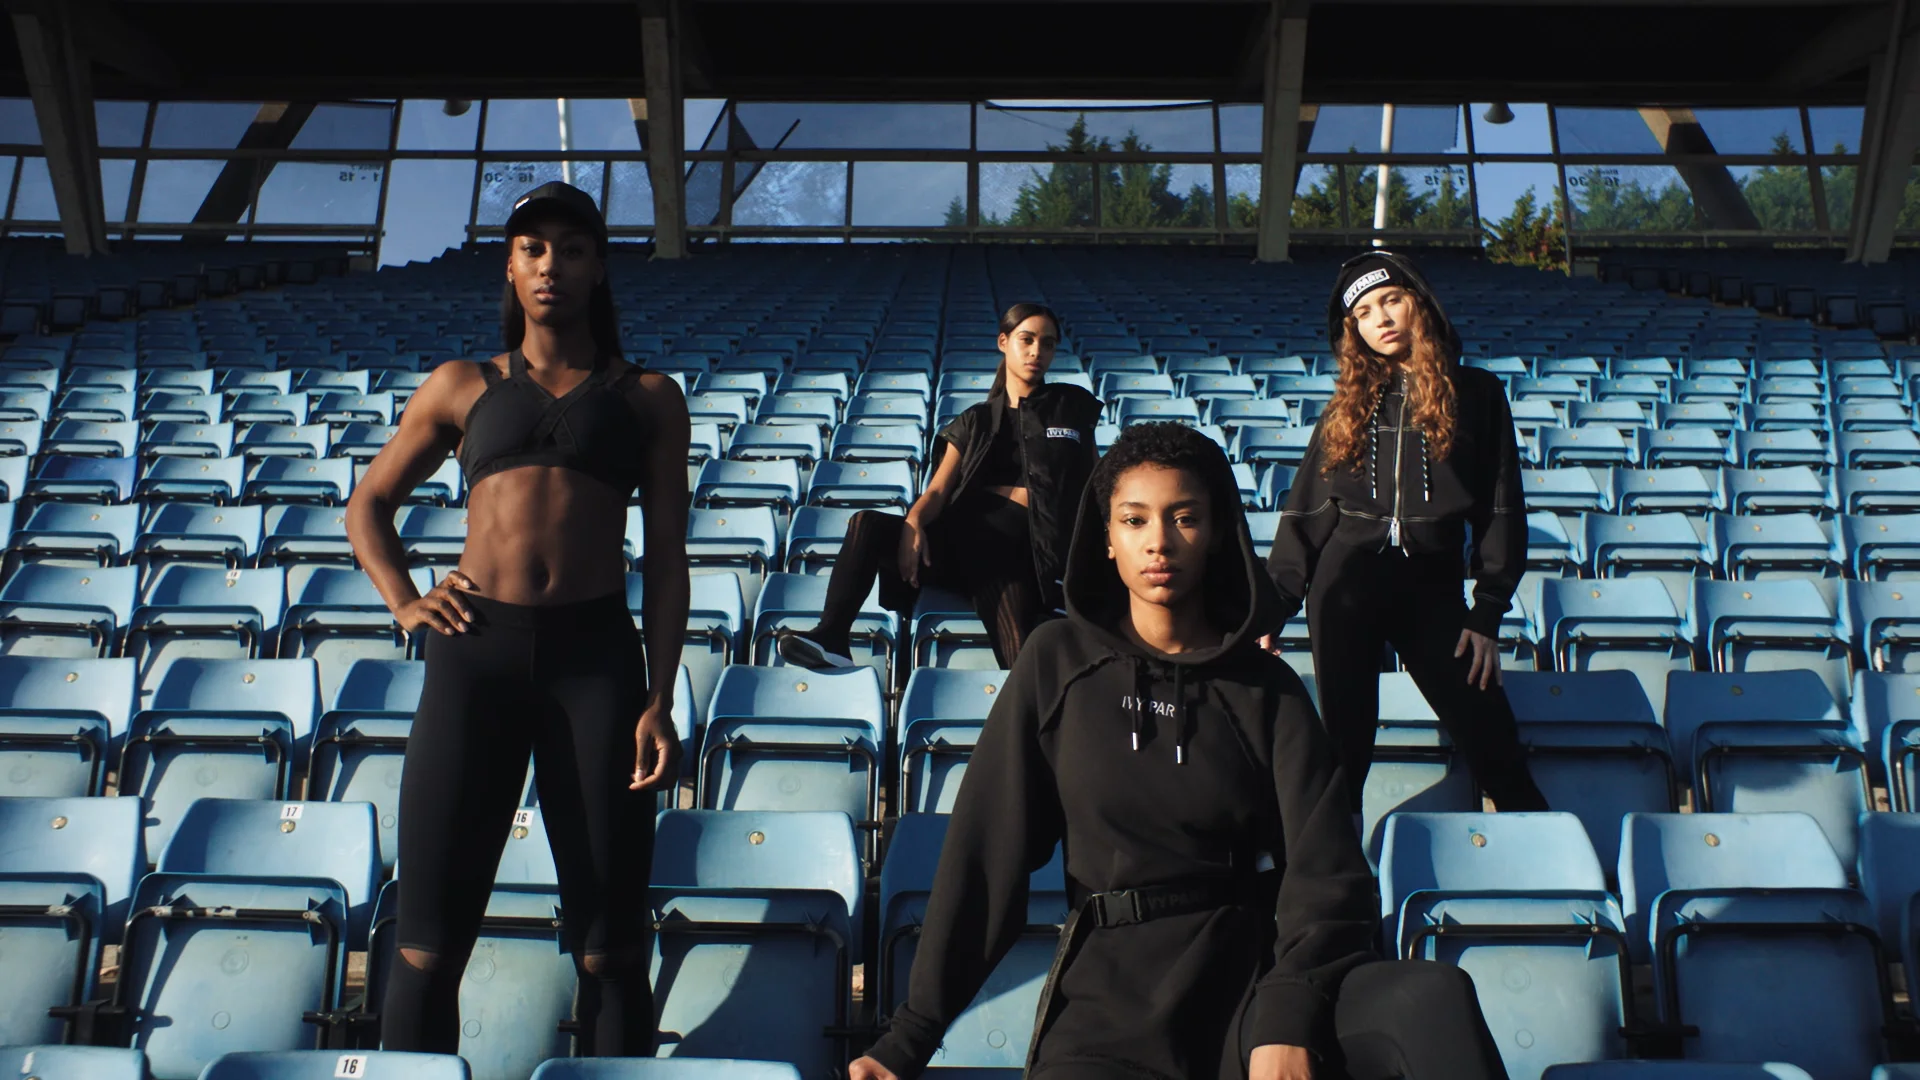 IVY PARK by BEYONCE on Vimeo